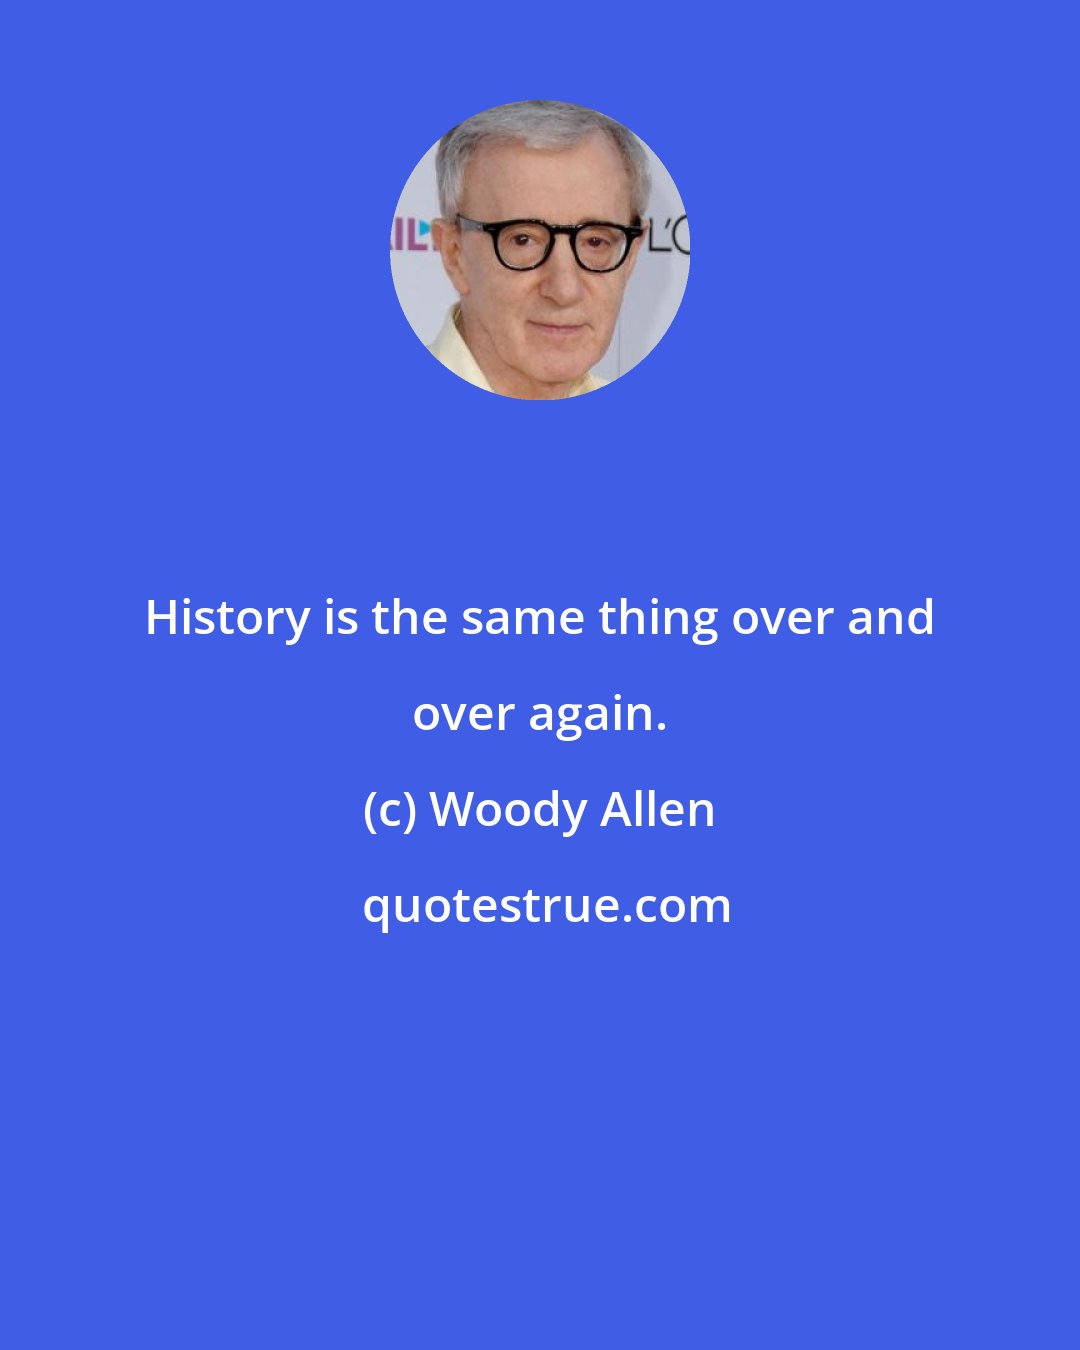 Woody Allen: History is the same thing over and over again.